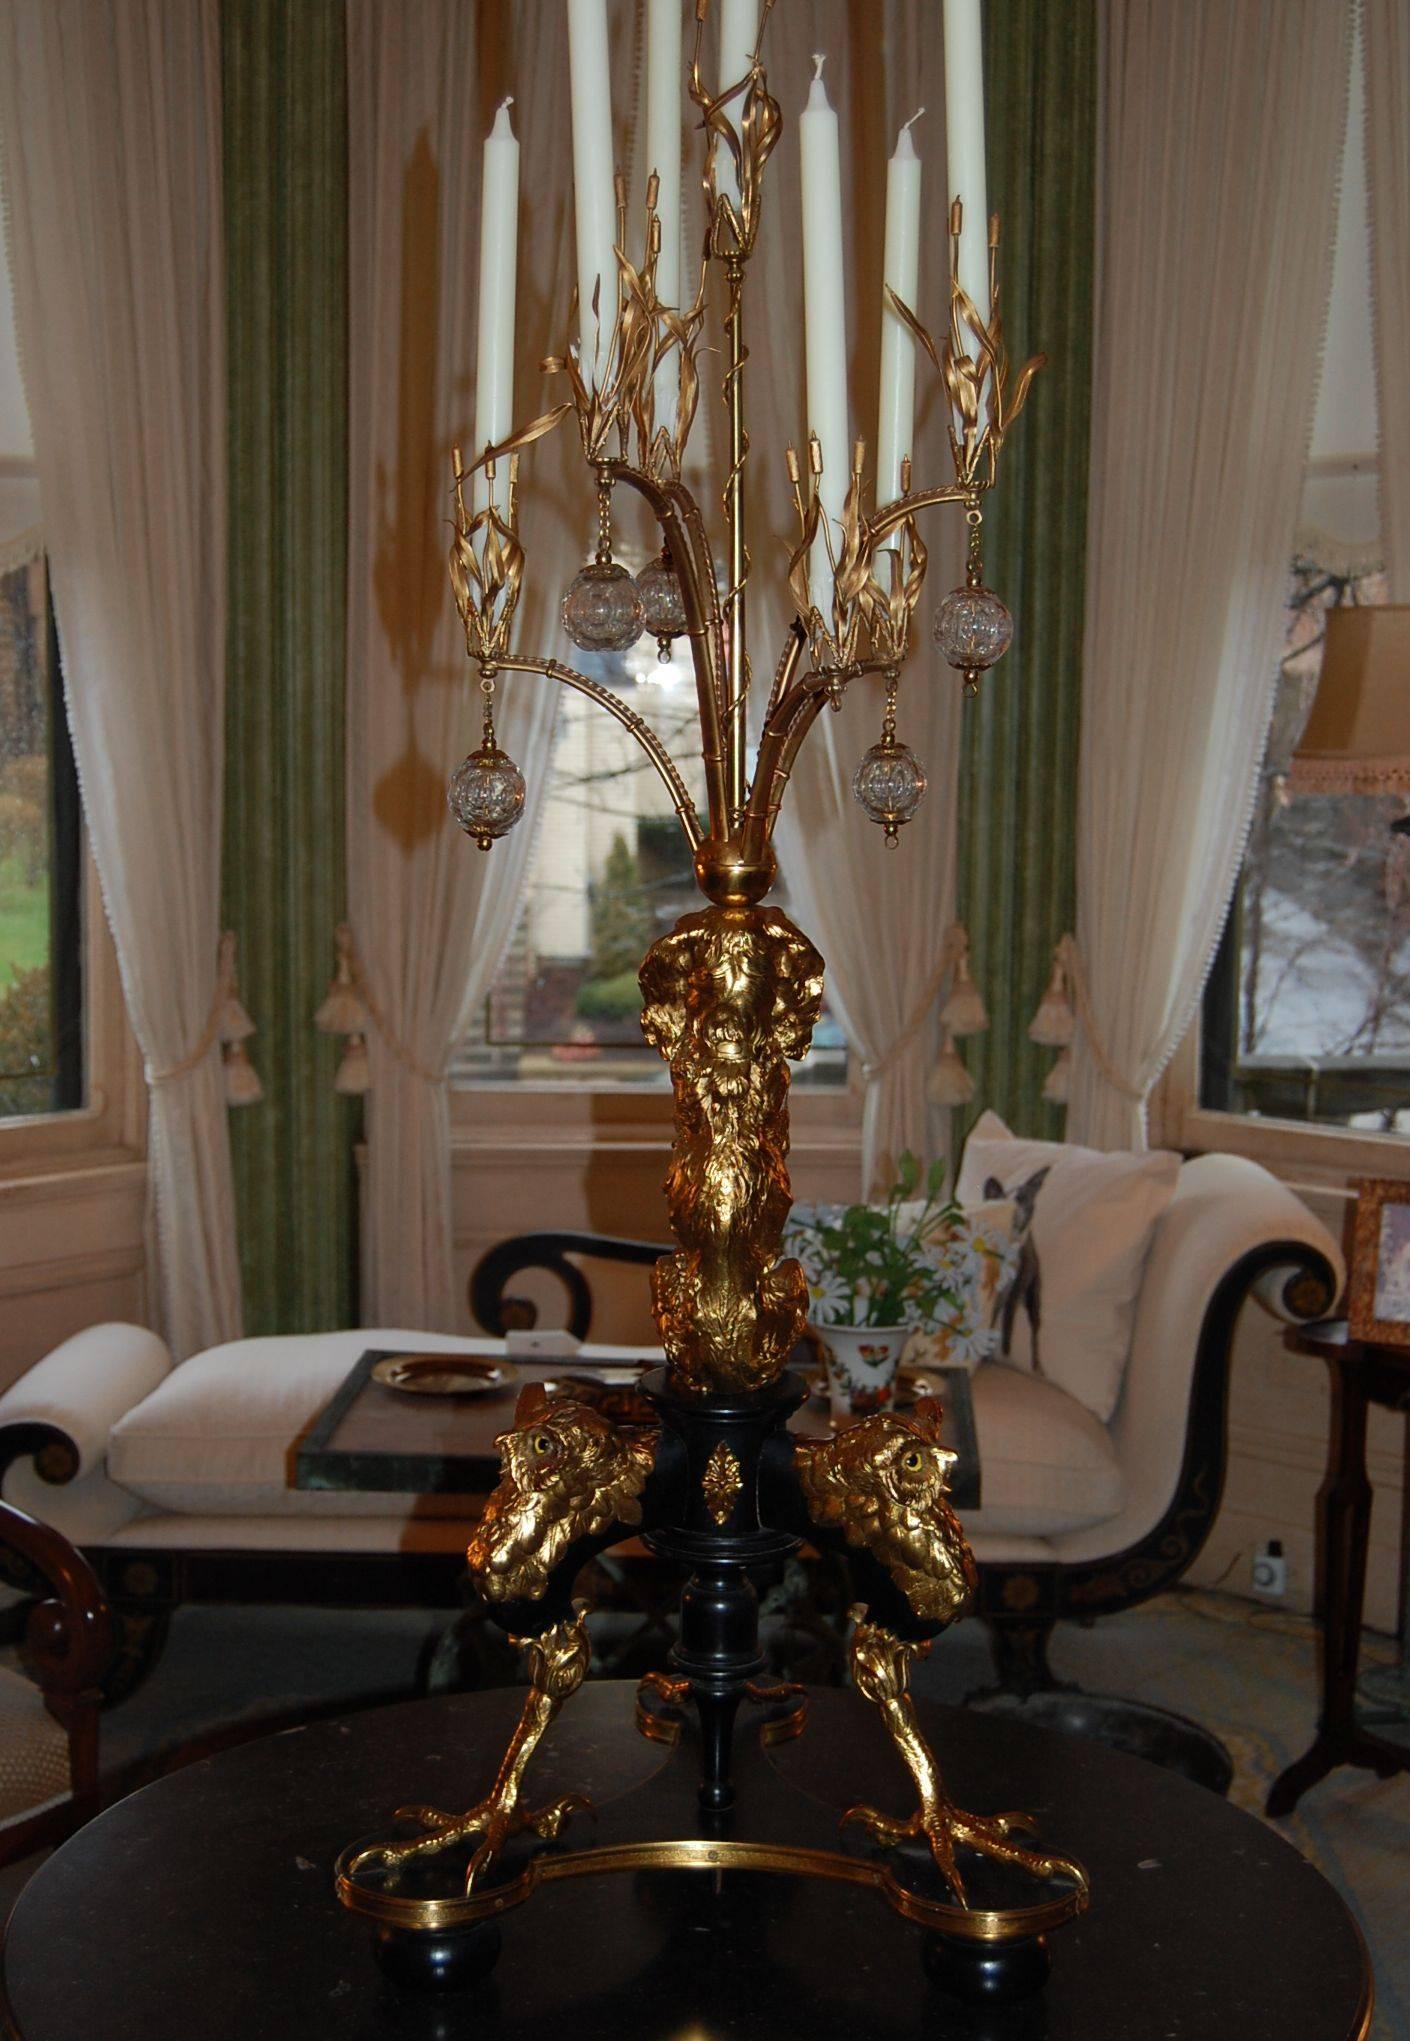 Regency Early 19th Century Large Gilt Brass and Wood Candelabra with Glass Balls For Sale